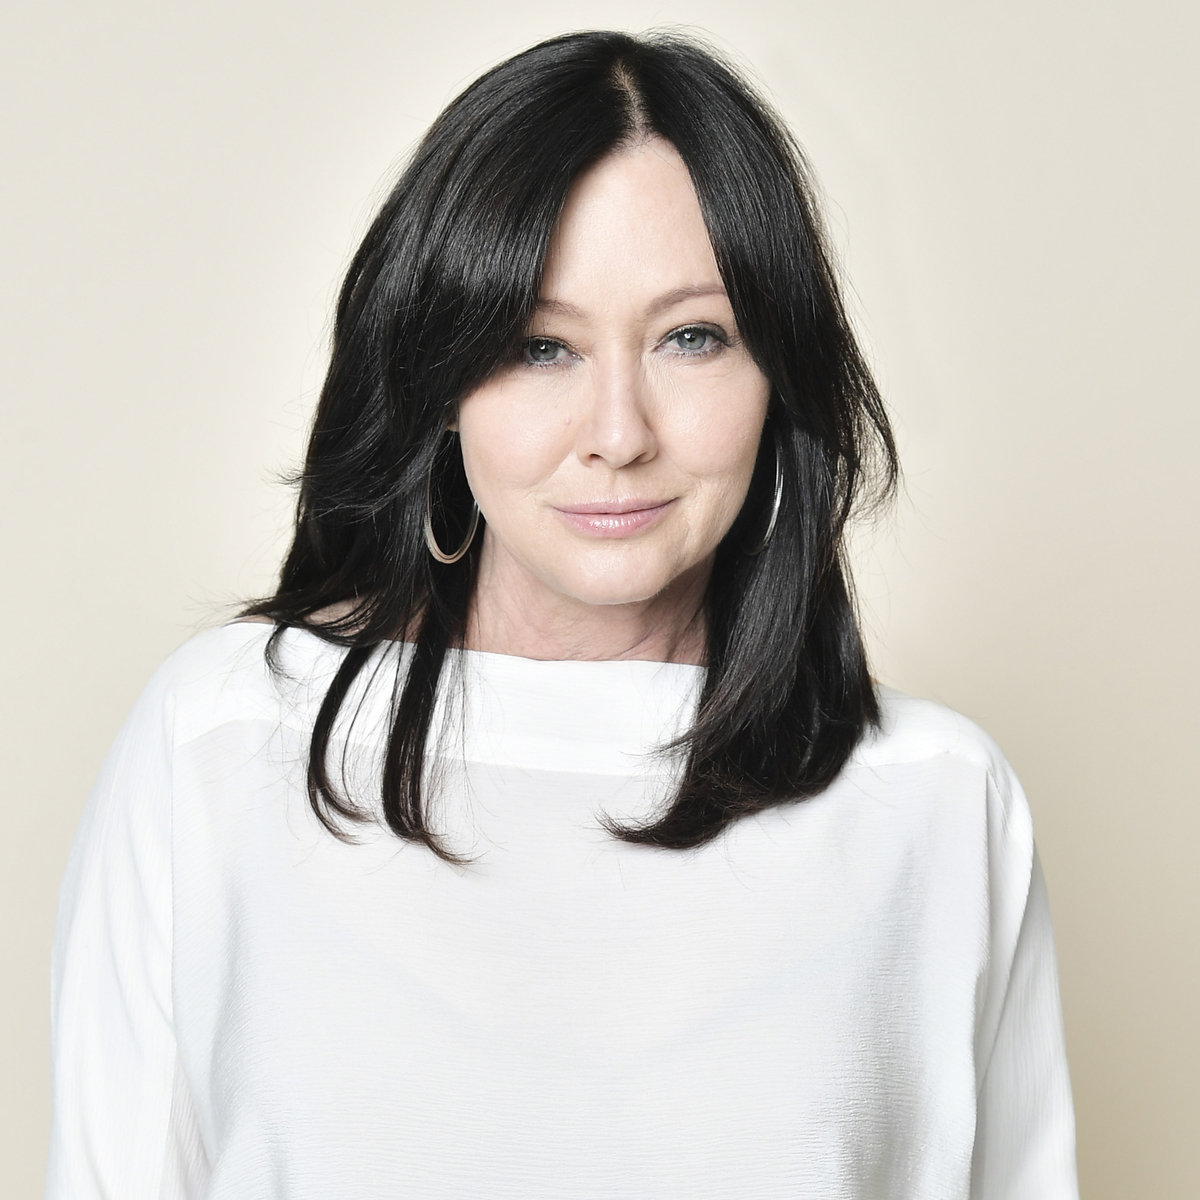 Shannen Doherty Says the “Clutter” Is Out of Her Life